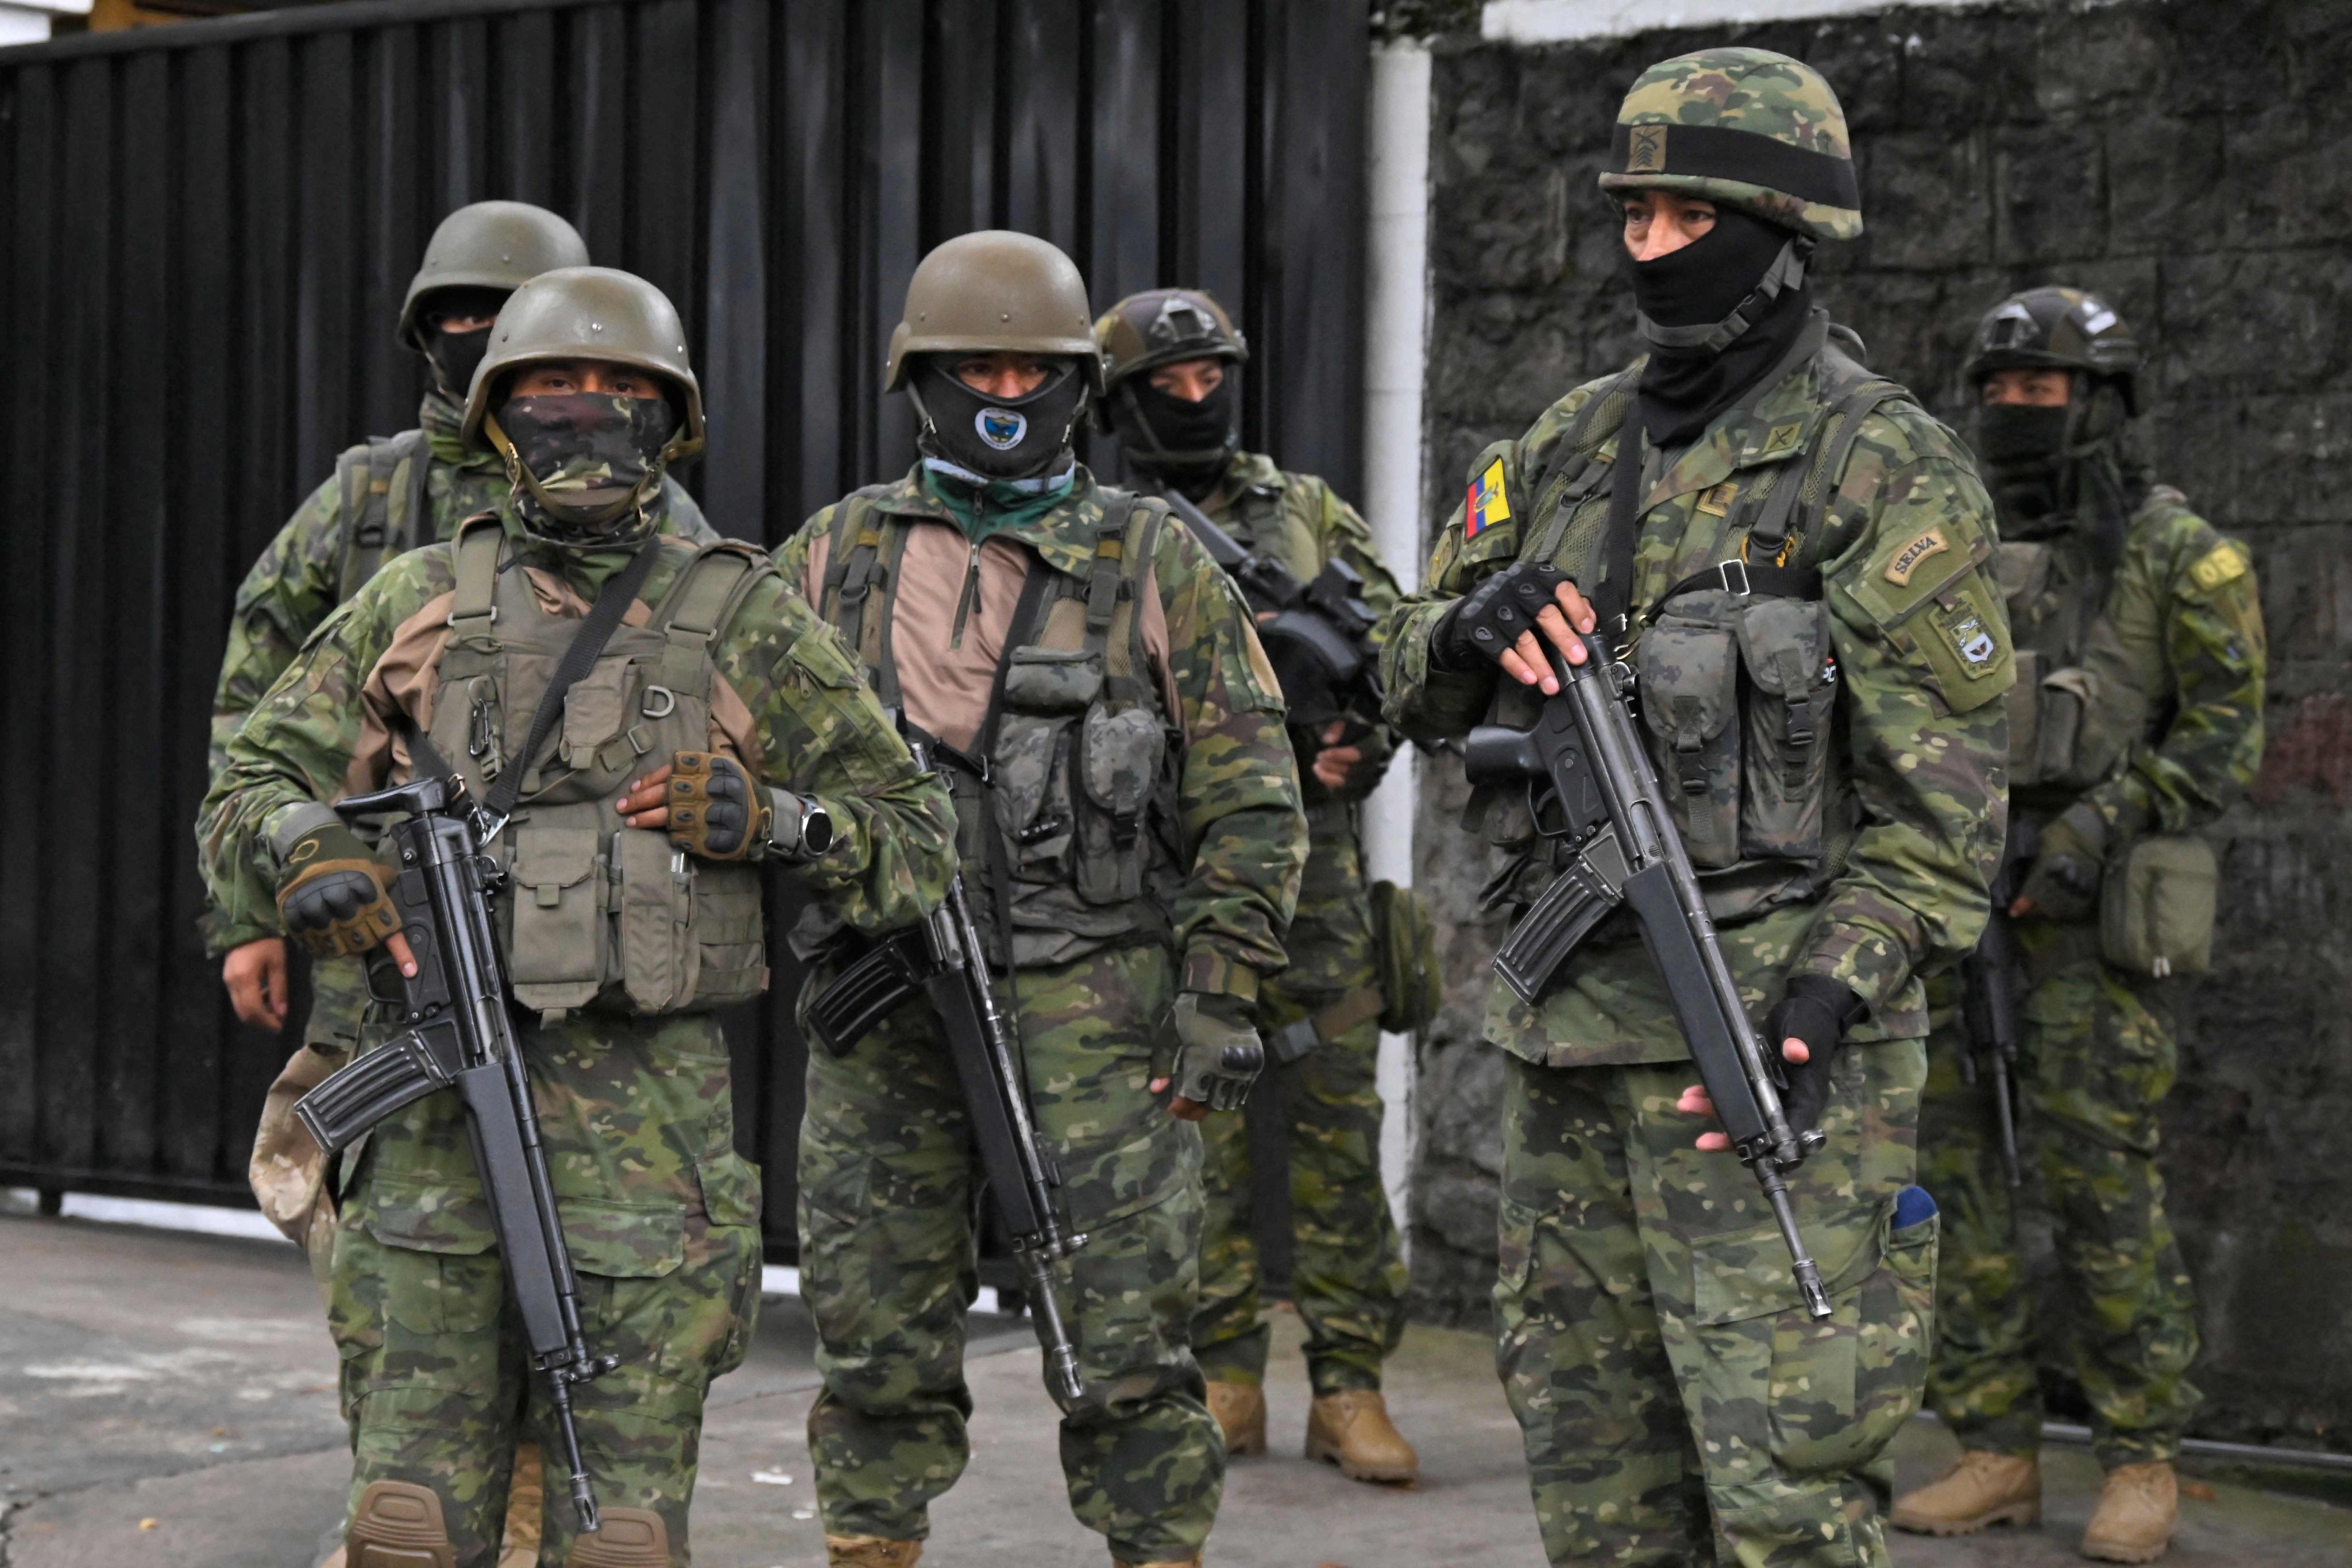 Soldiers in Quito, Ecuador on Sunday. Photo: AFP